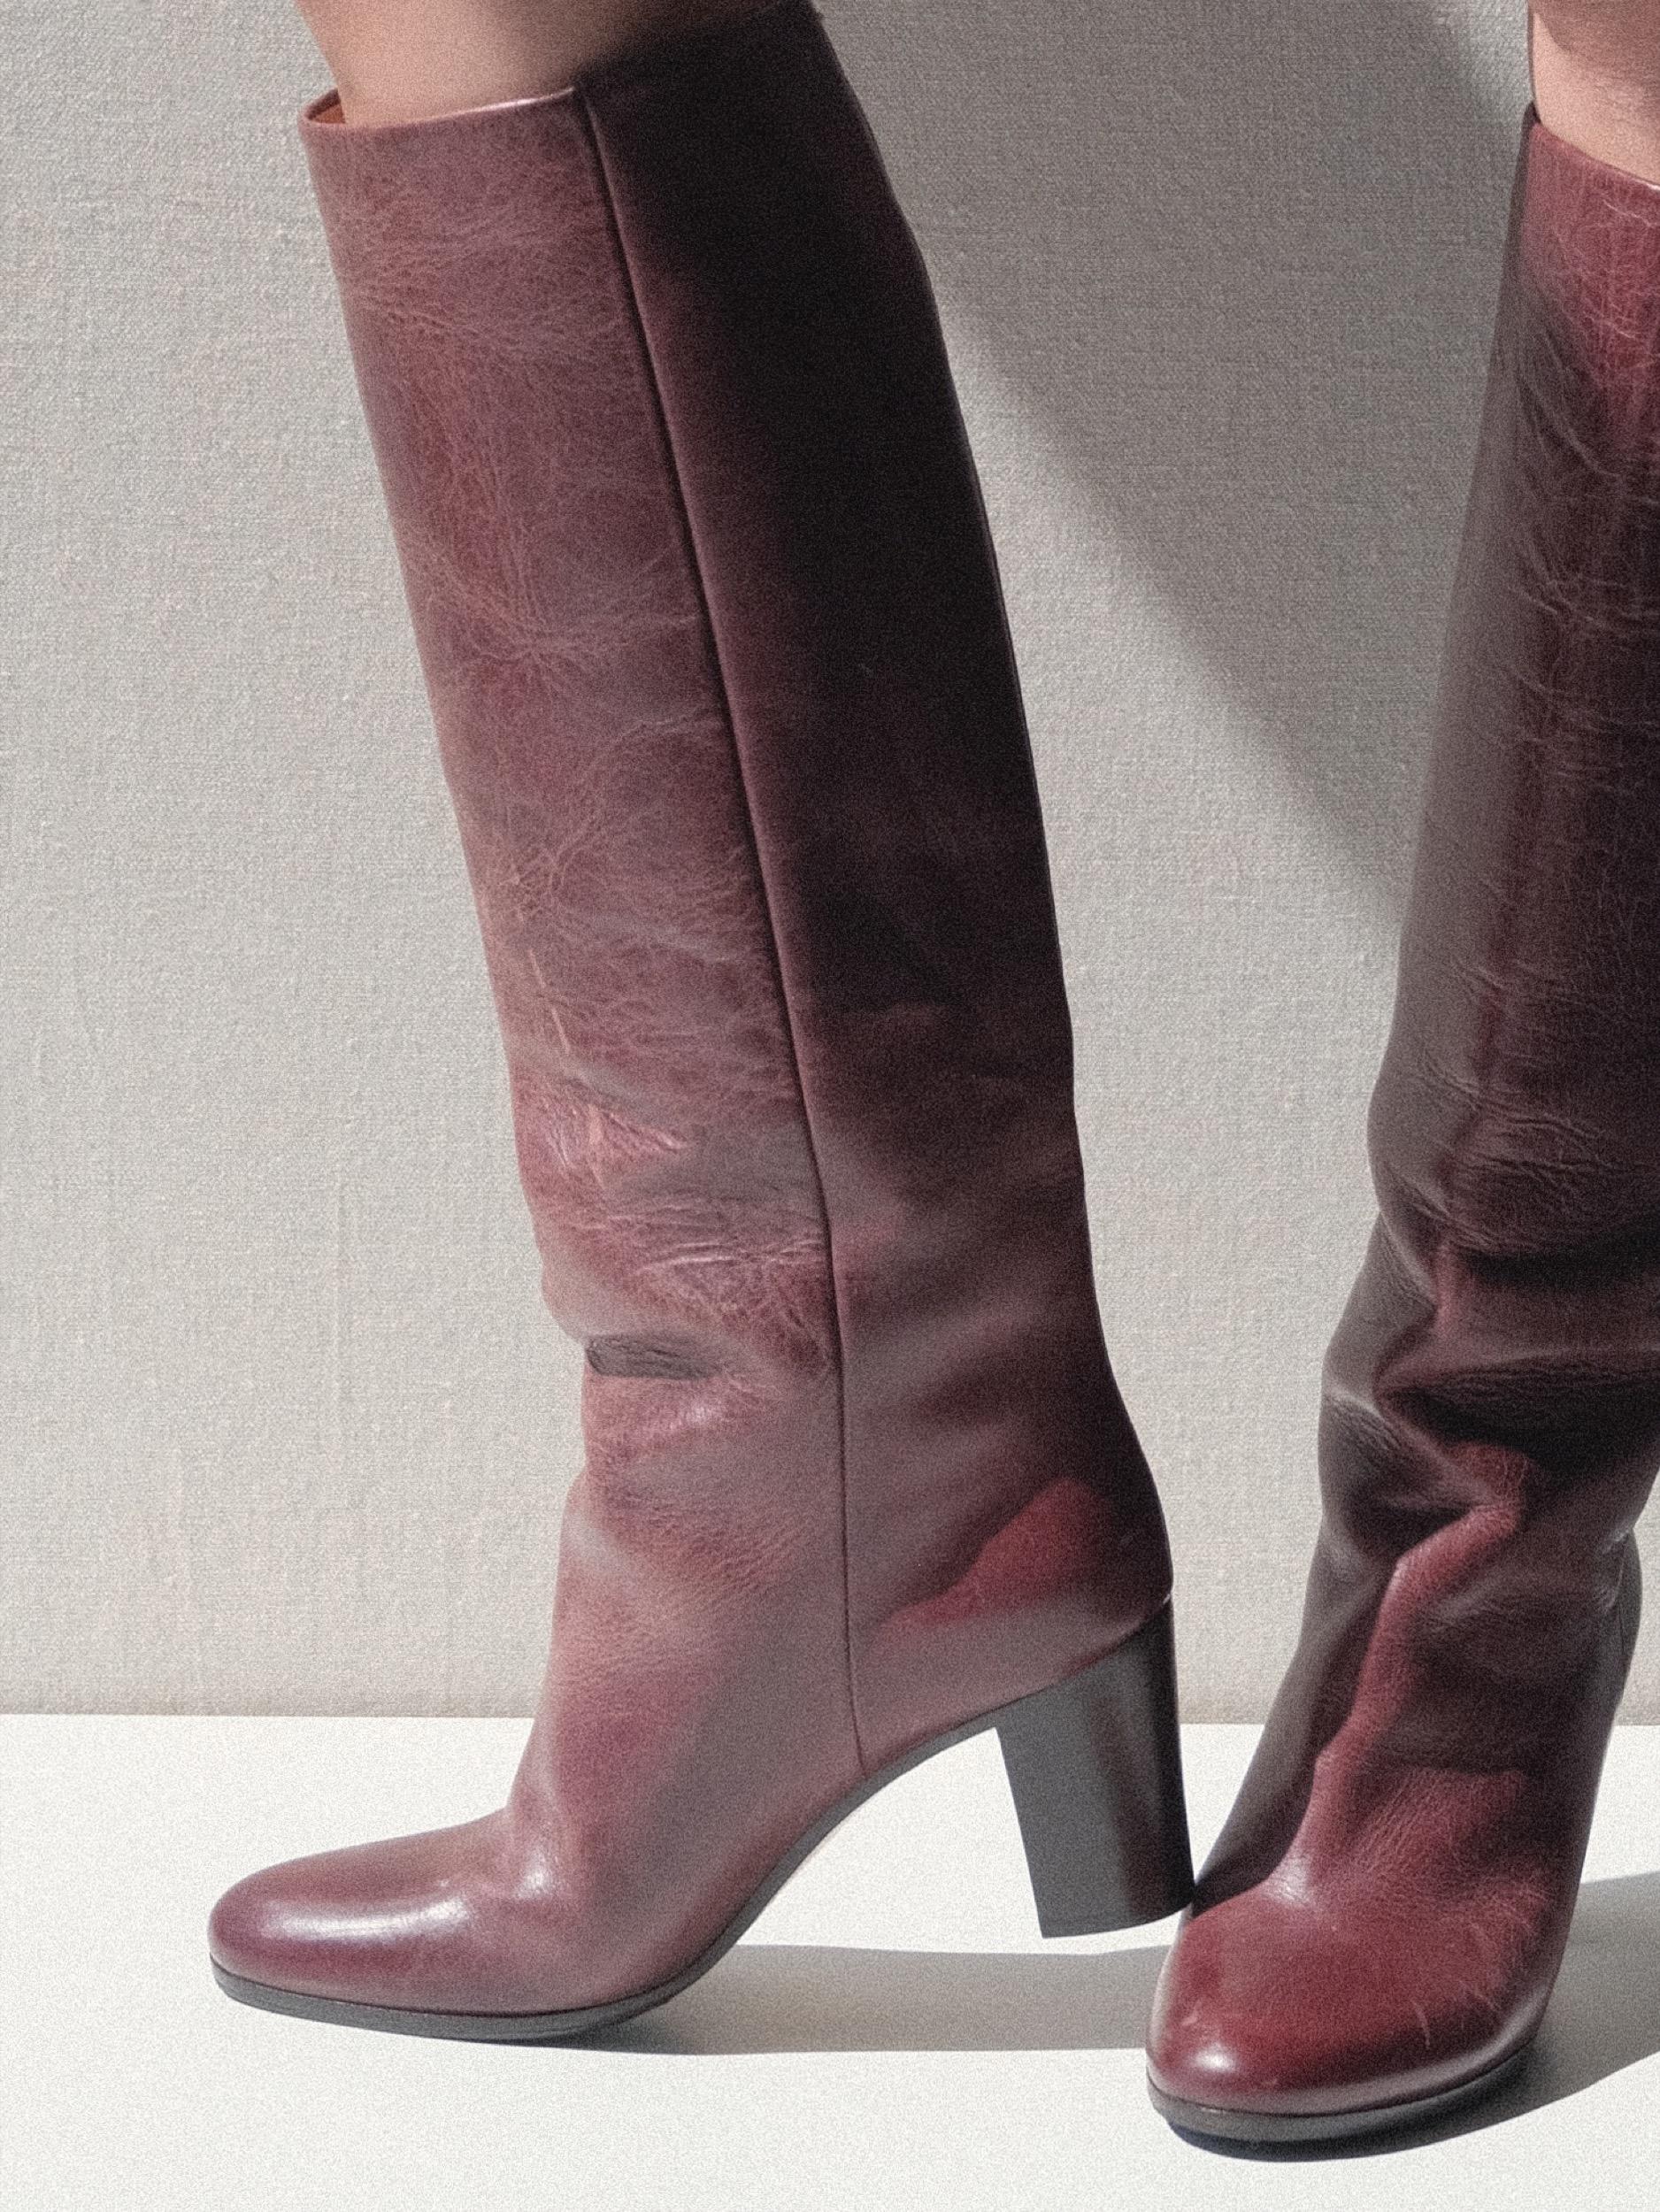 Martin Margiela Riding Boots Deep Red Size 37 Replica Line 22 For Sale 10